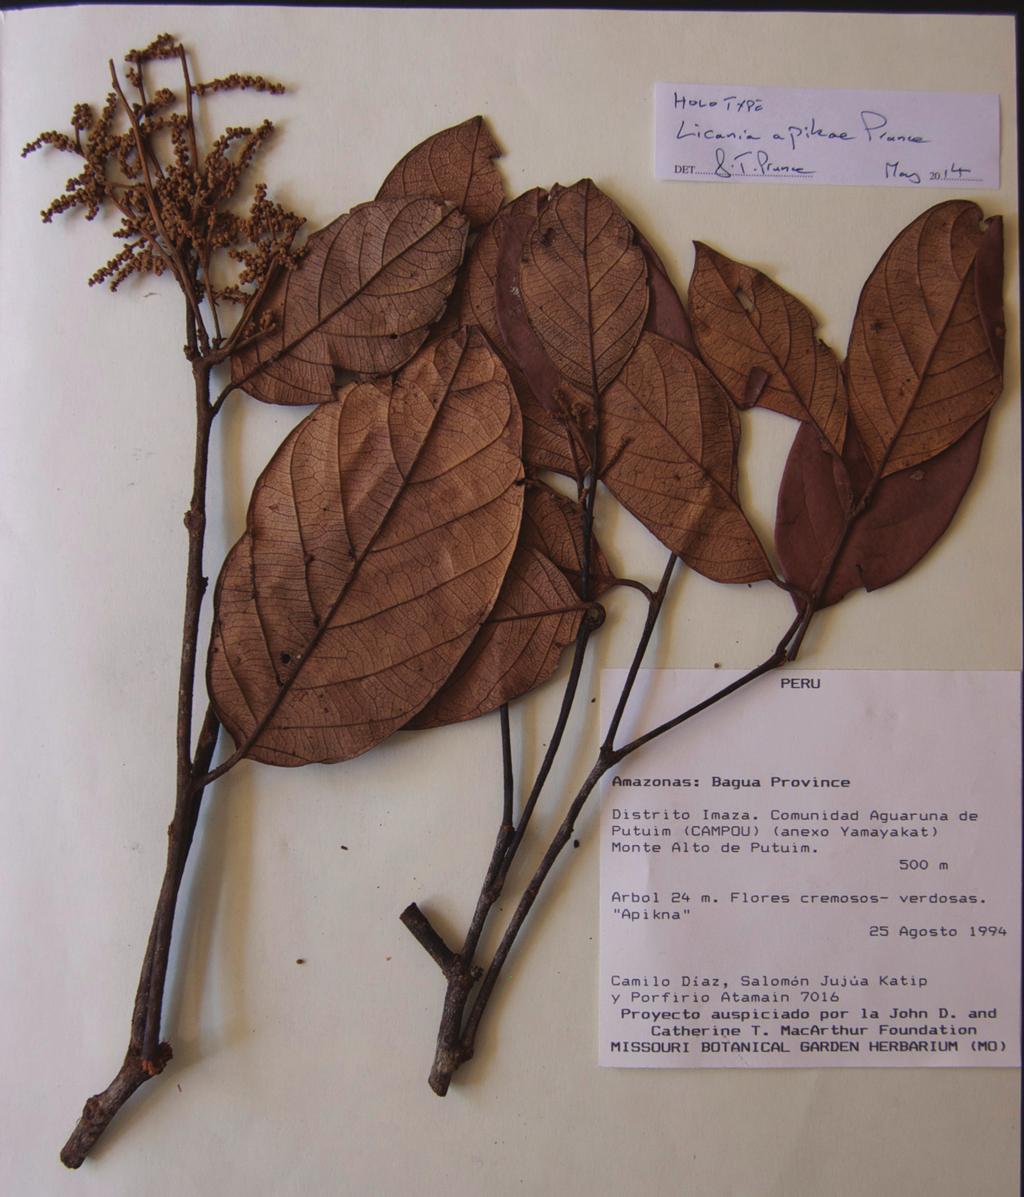 Three new species of Licania (Chrysobalanaceae) from Peru 5 Figure 3. Photo of the holotype of Licania apiknae (Diaz et al. 7016). es. Petals absent. Stamens 5 6, inserted to one side of ring.